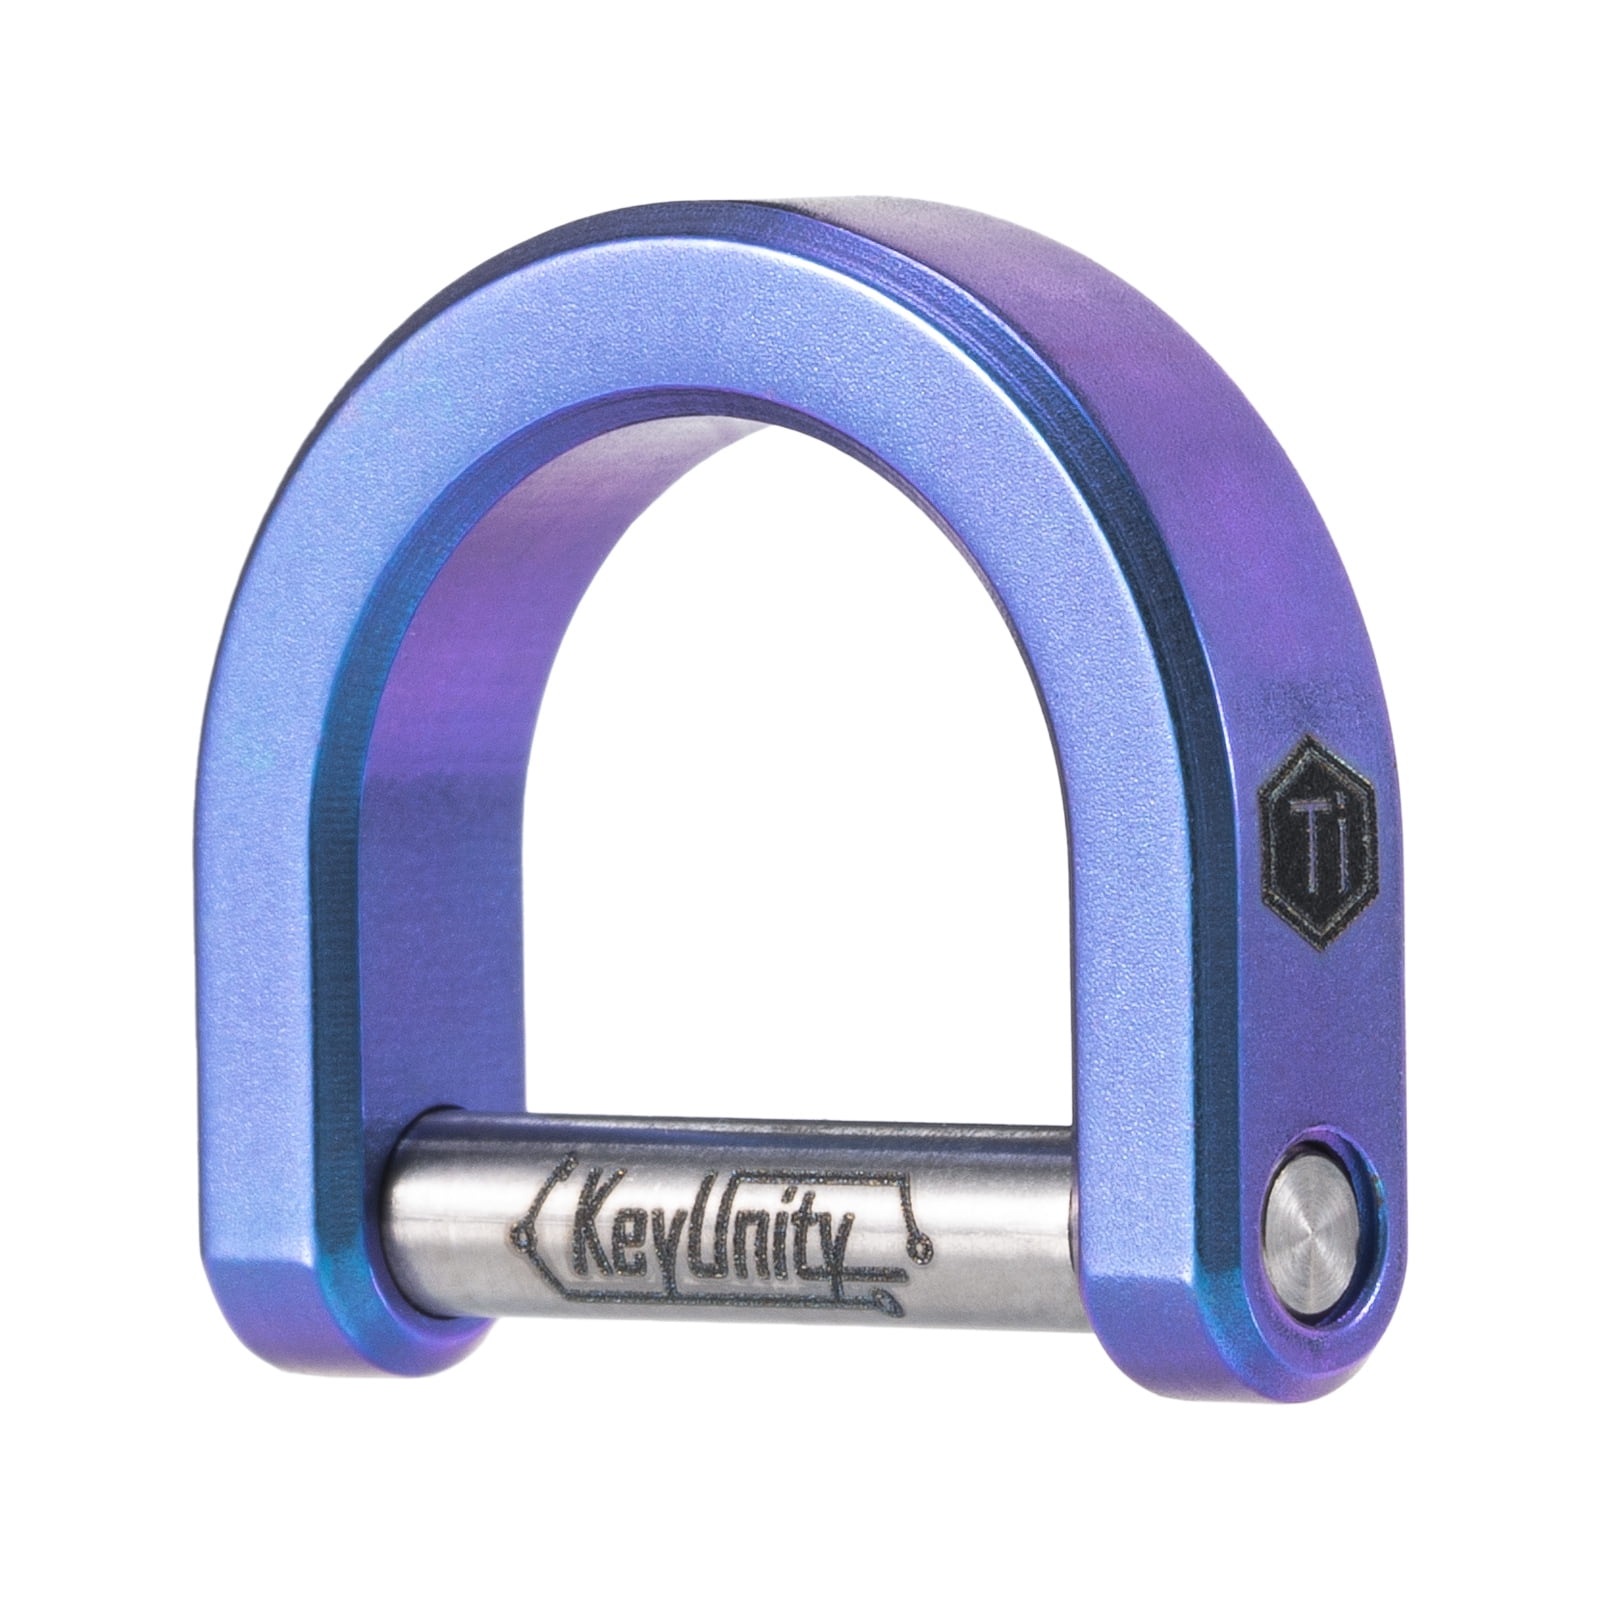 Key Kop II Locking Key Ring with 2 Inch Shackle and Blue Colored Boot